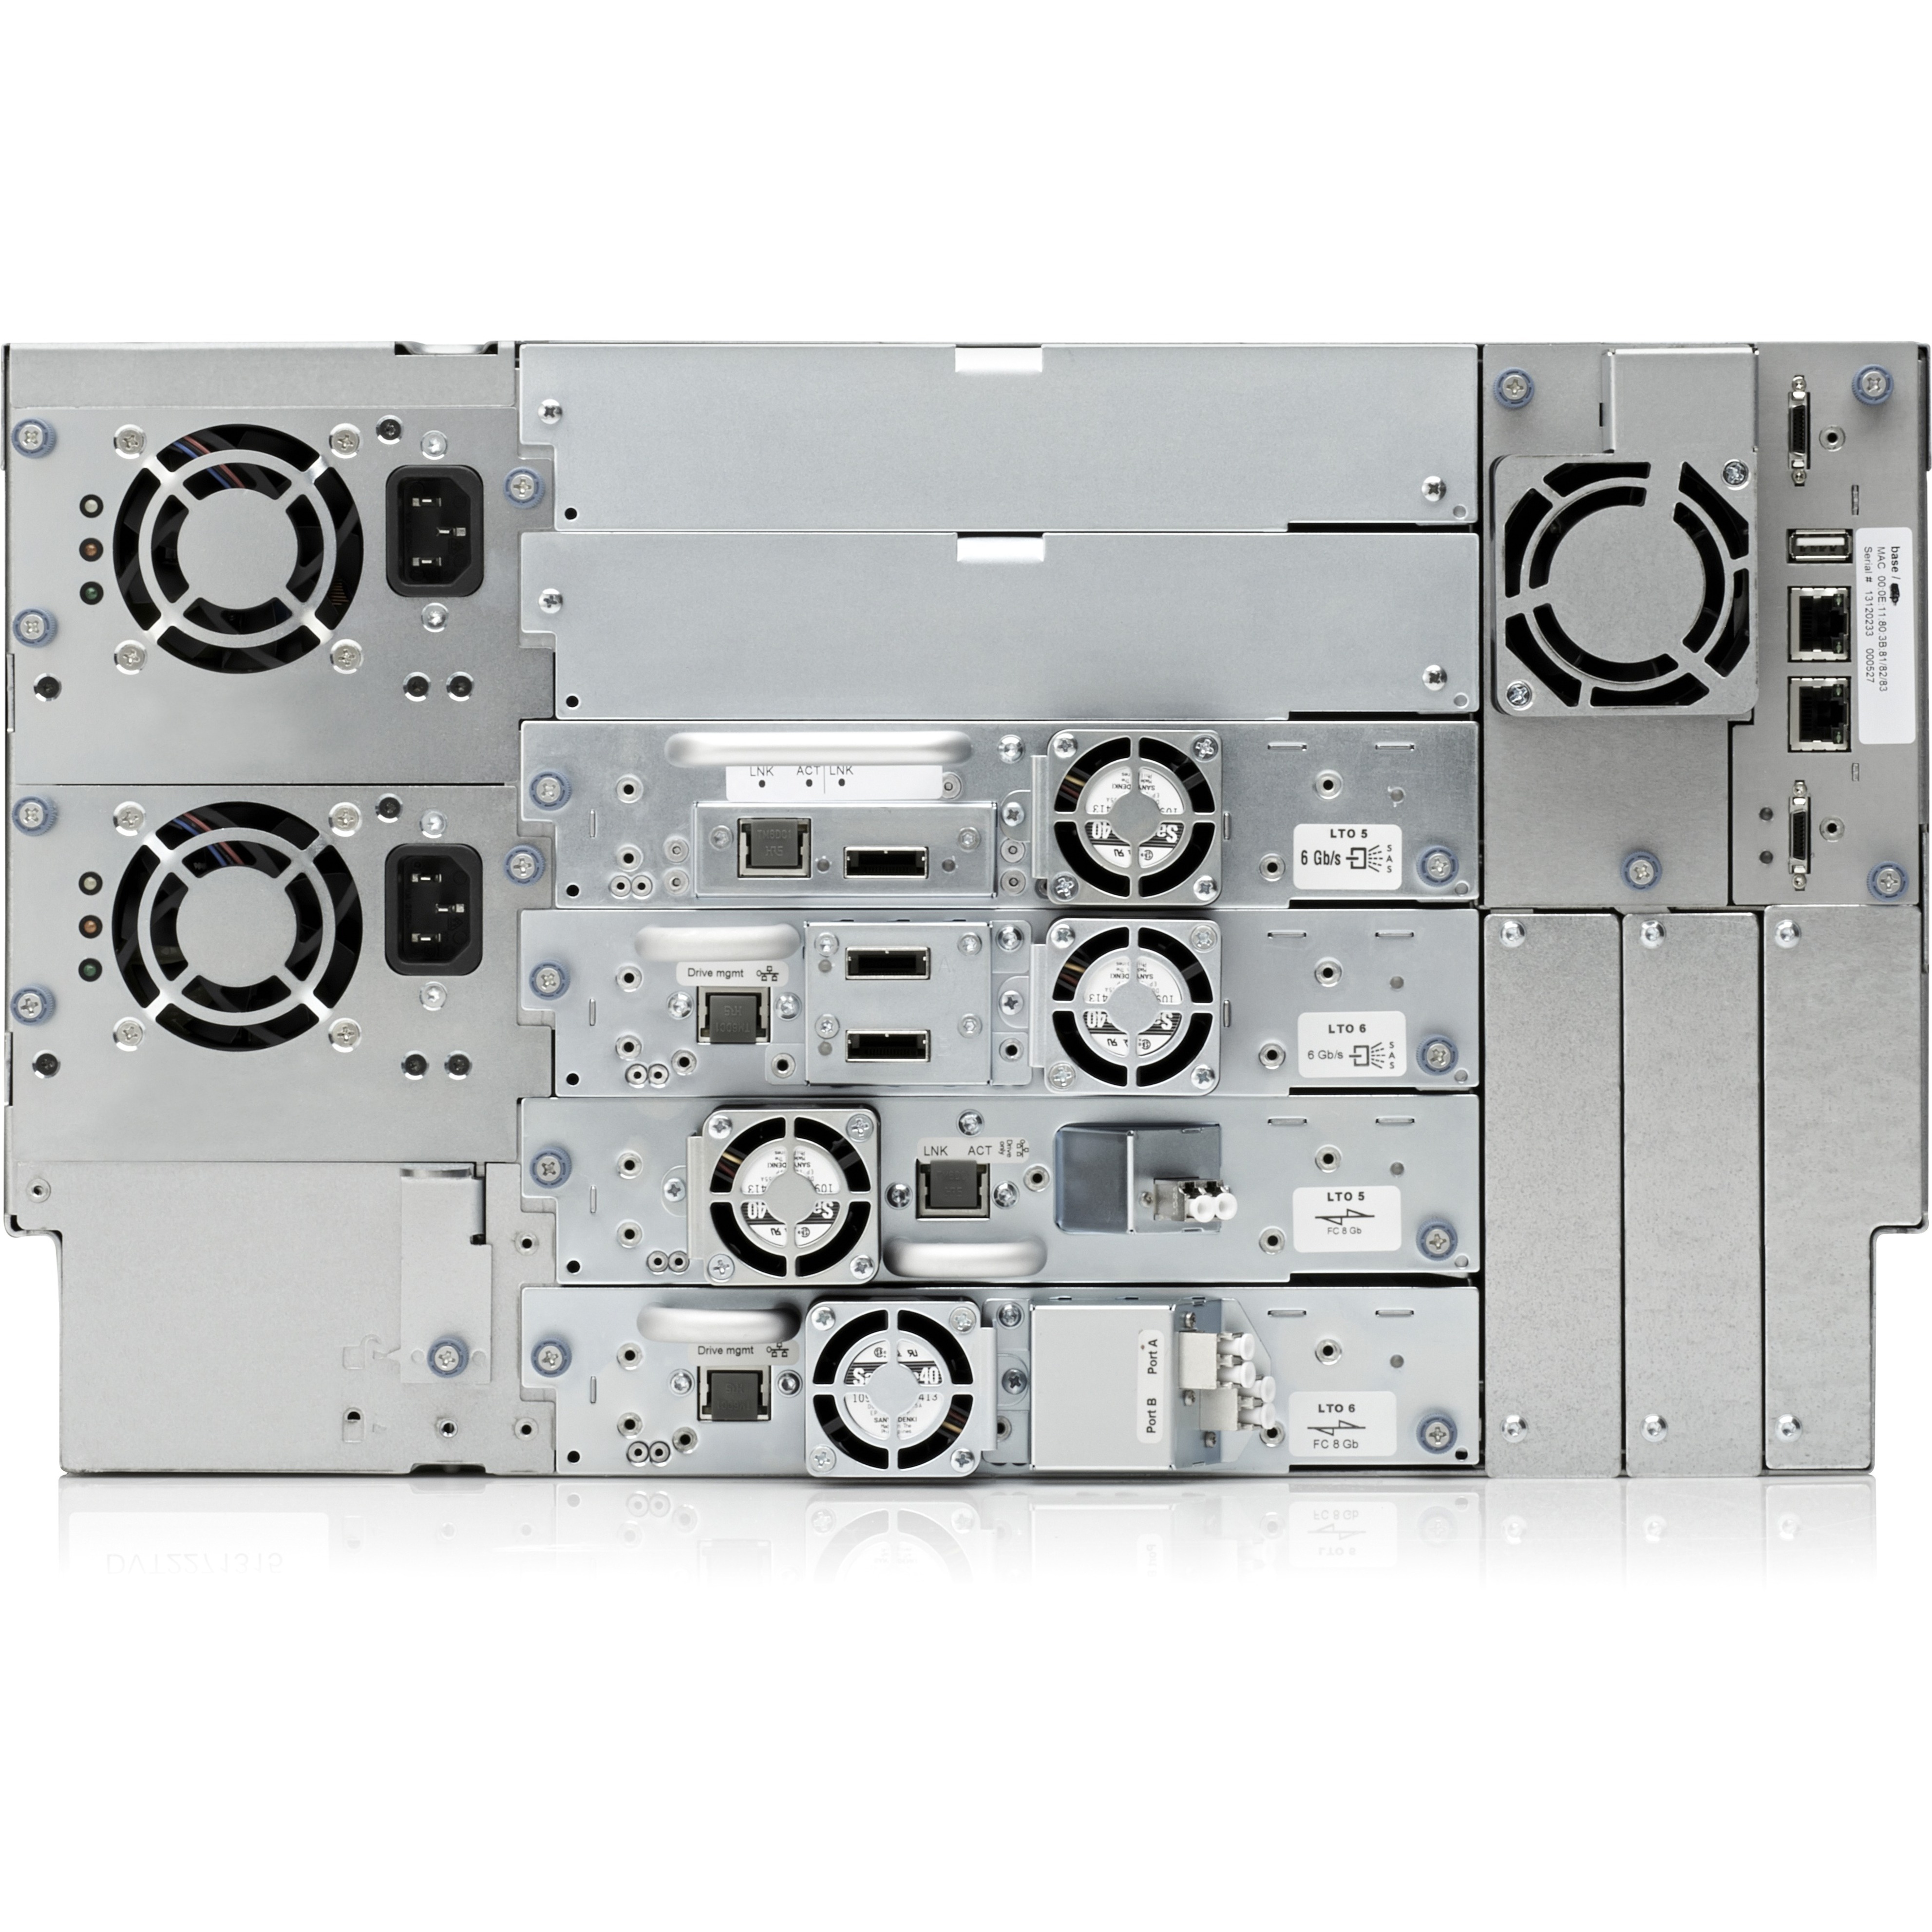 HPE StoreEver MSL6480 Scalable Expansion Module - tape library expansion module - no tape drives - image 2 of 2